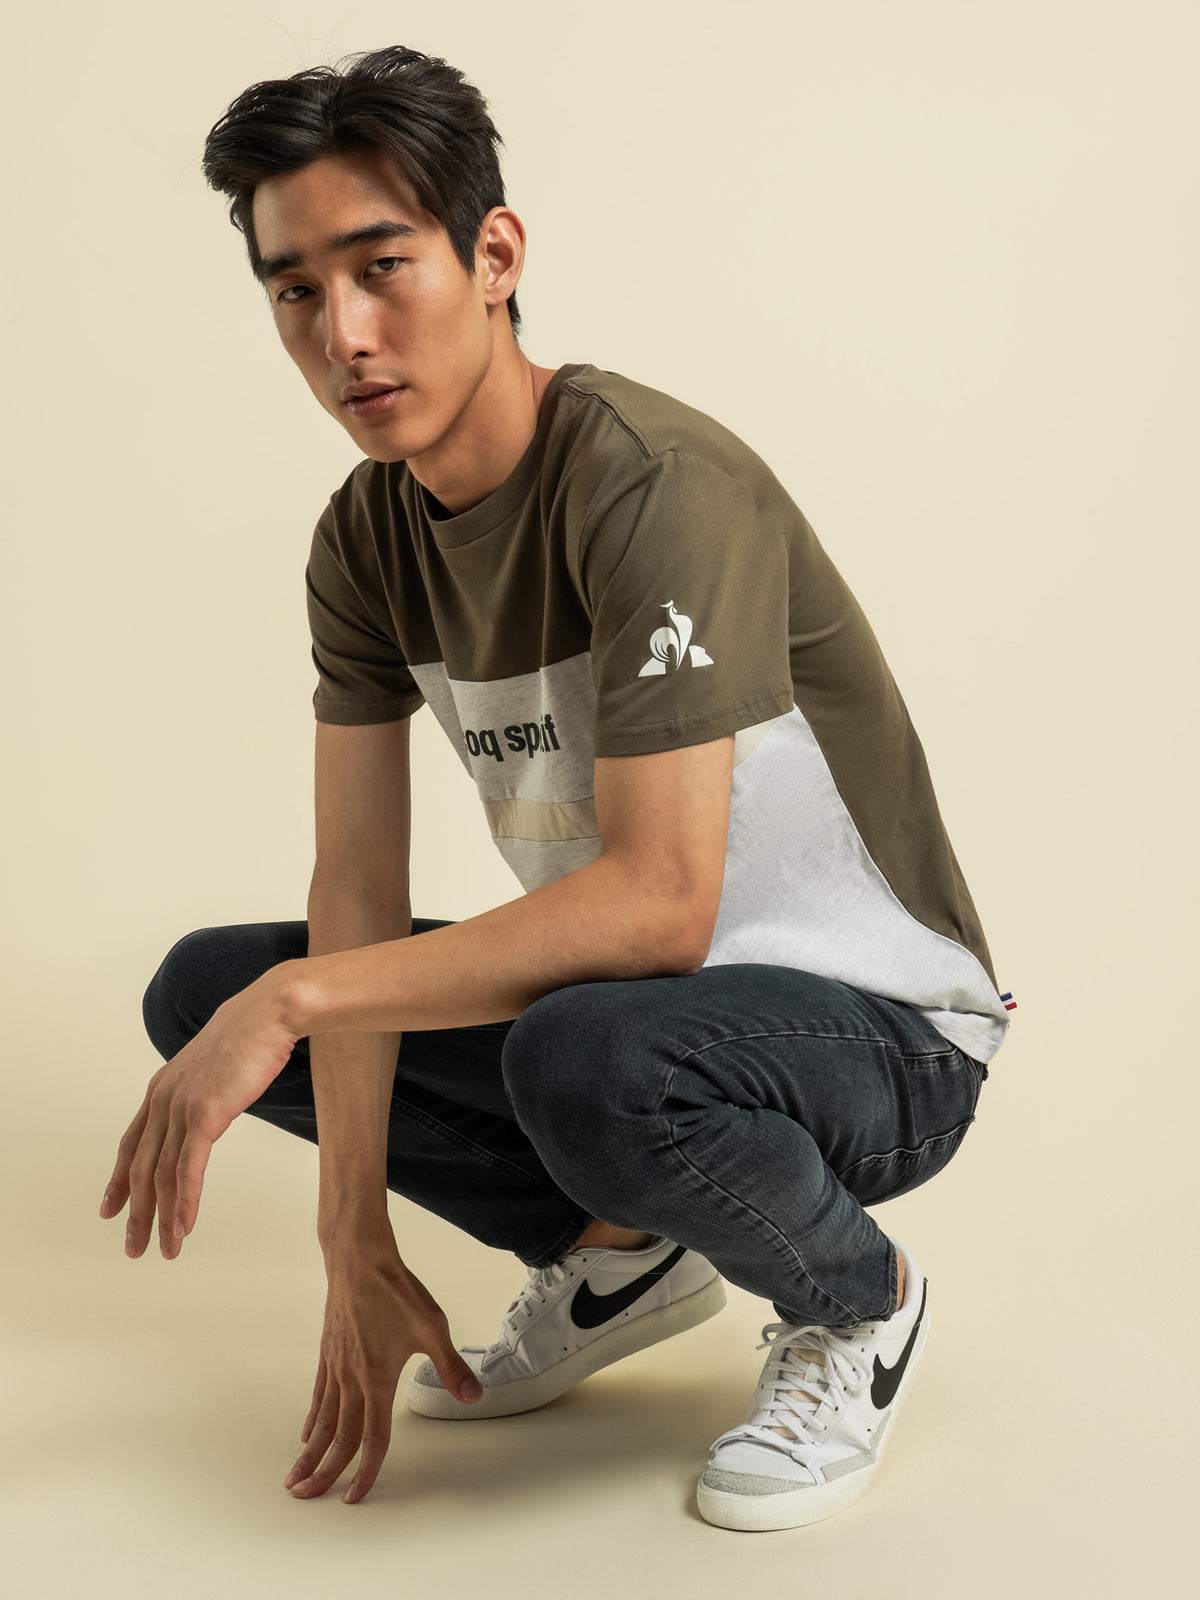 Georges T-Shirt in Khaki